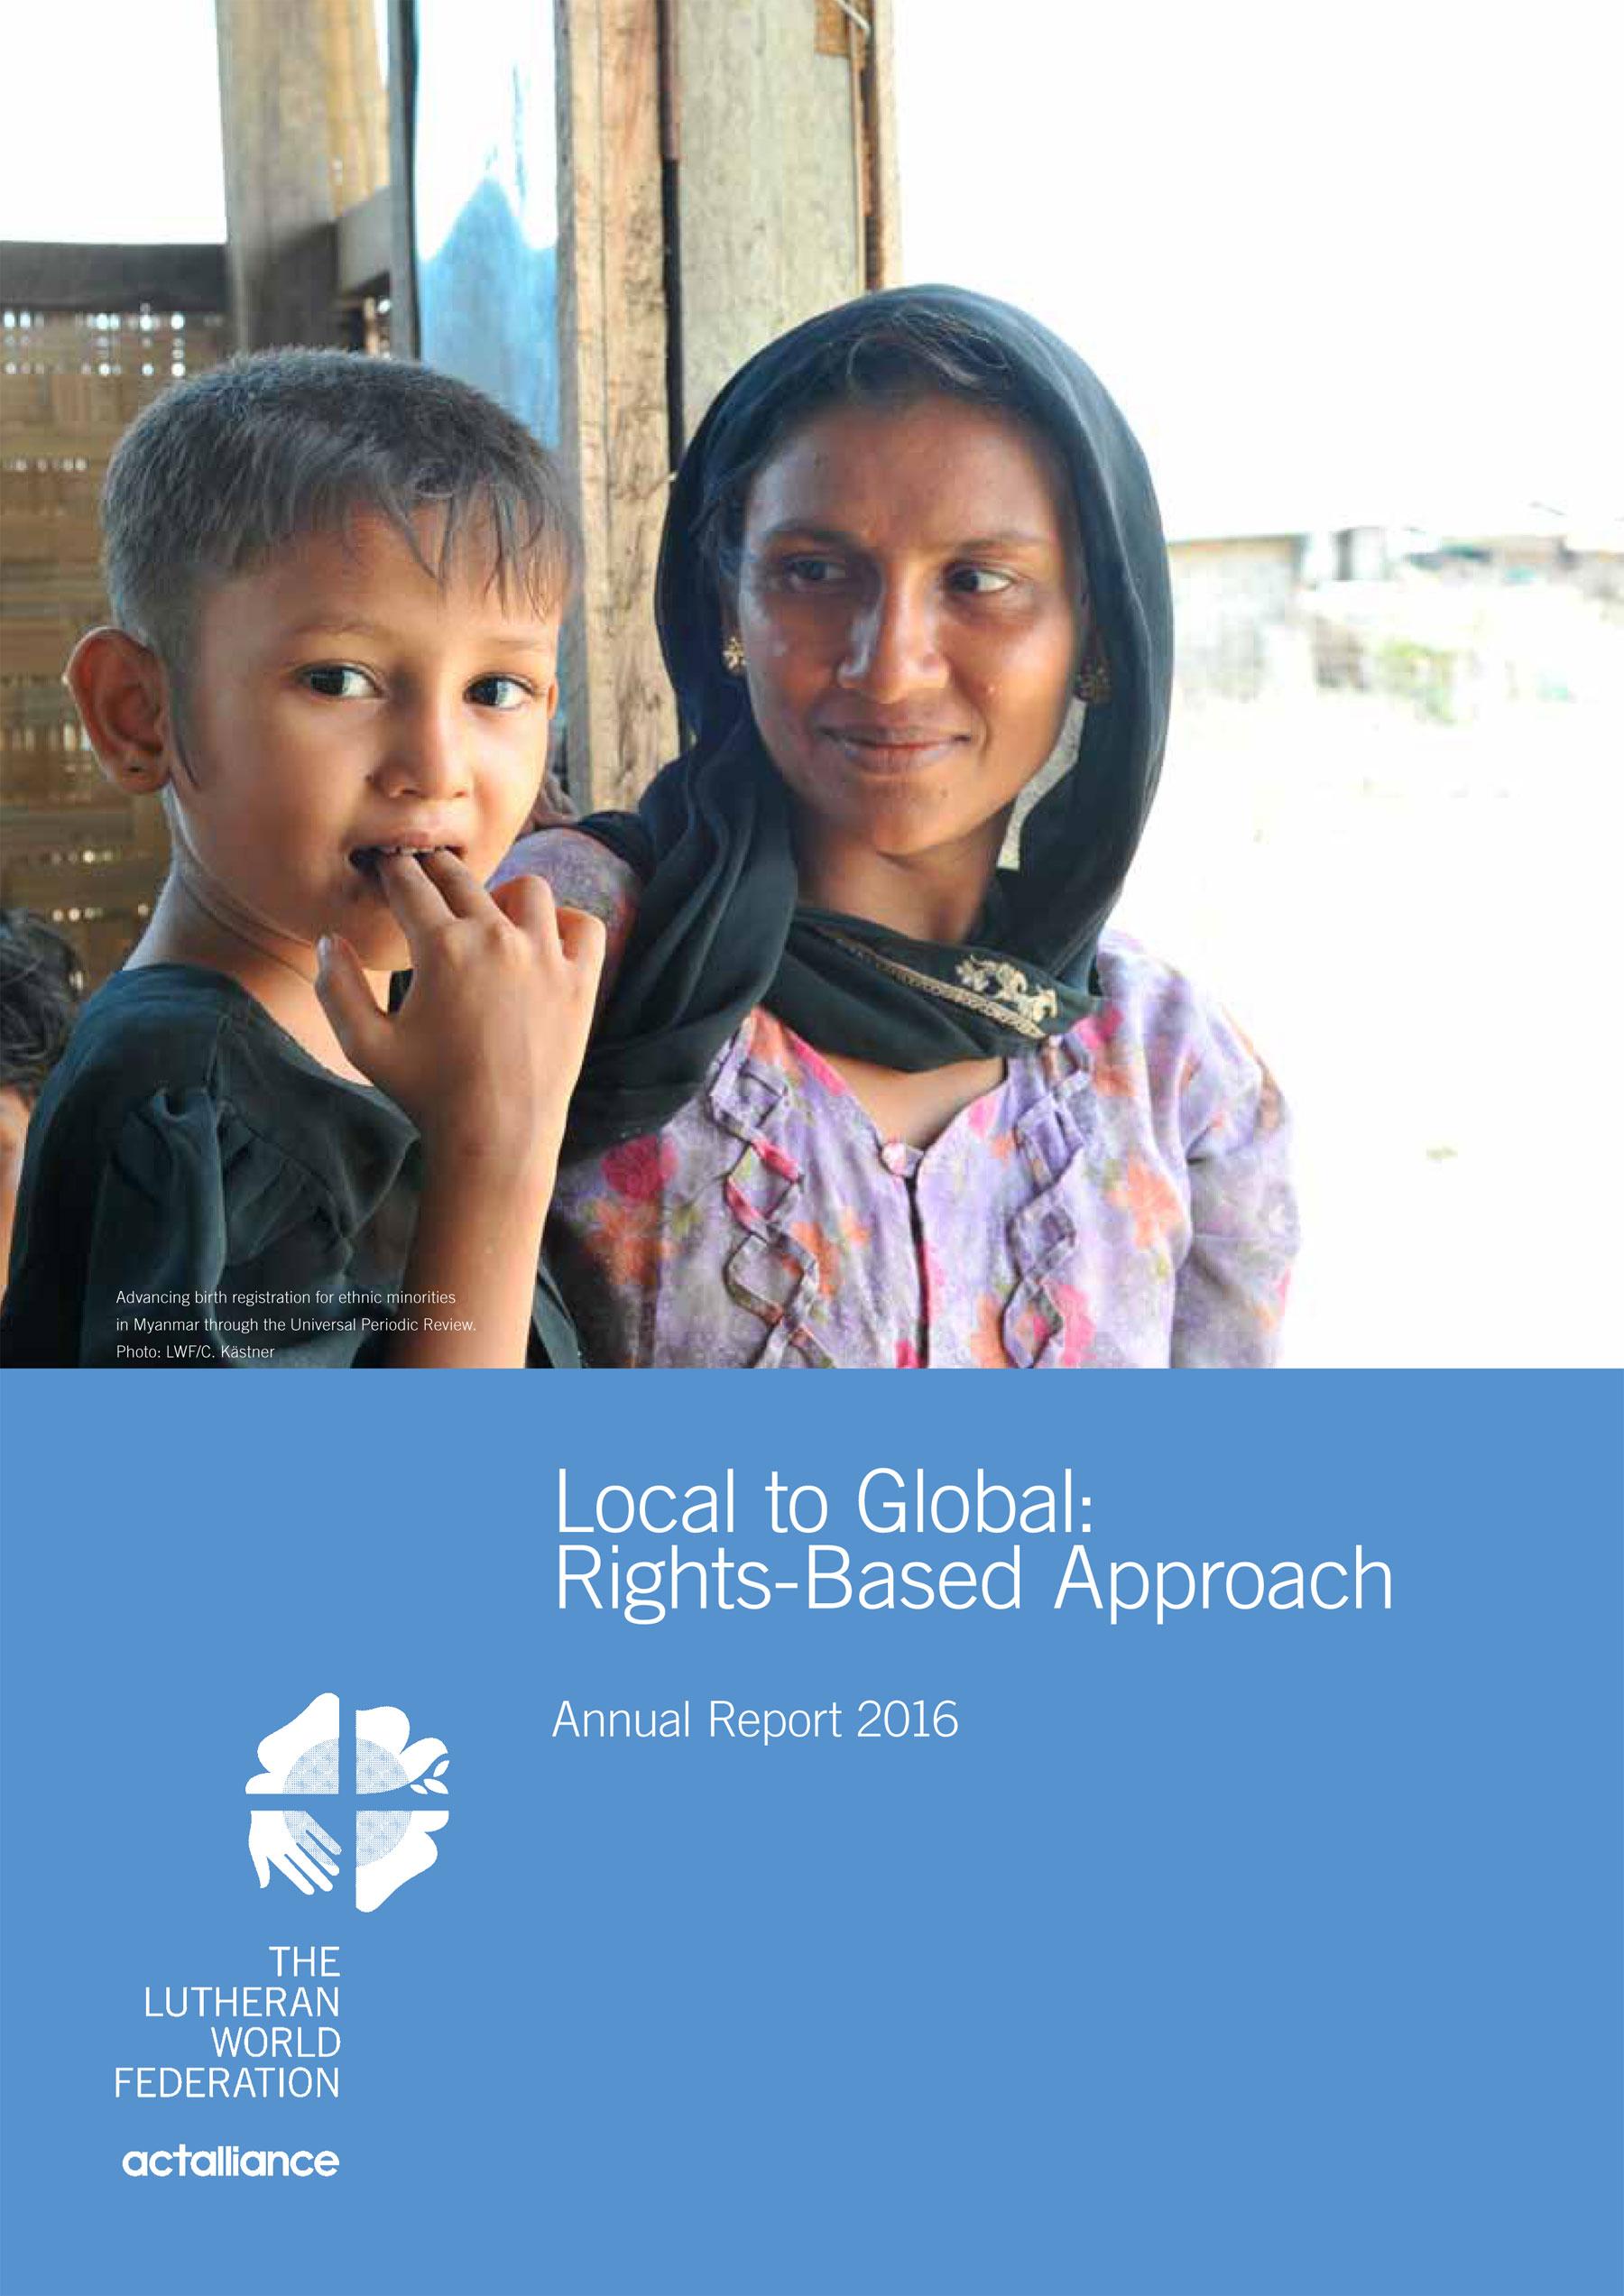 Rights-Based Approach Local to Global